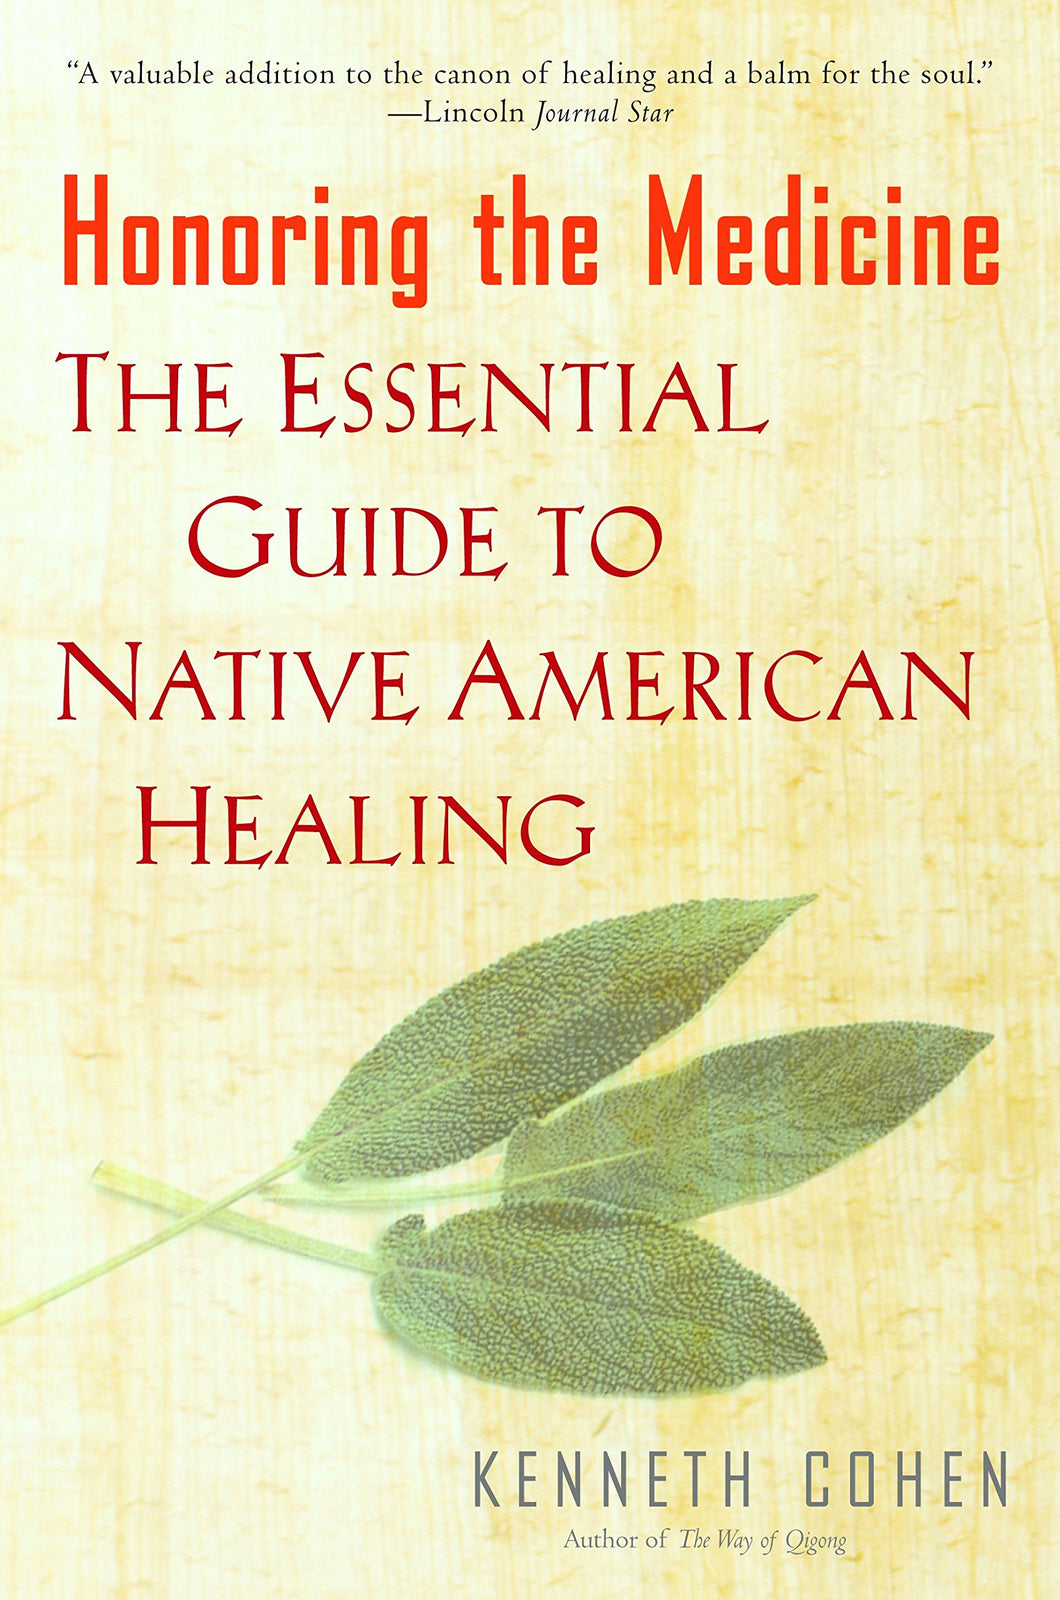 Honoring the Medicine: The Essential Guide to Native American Healing [Kenneth Cohen]